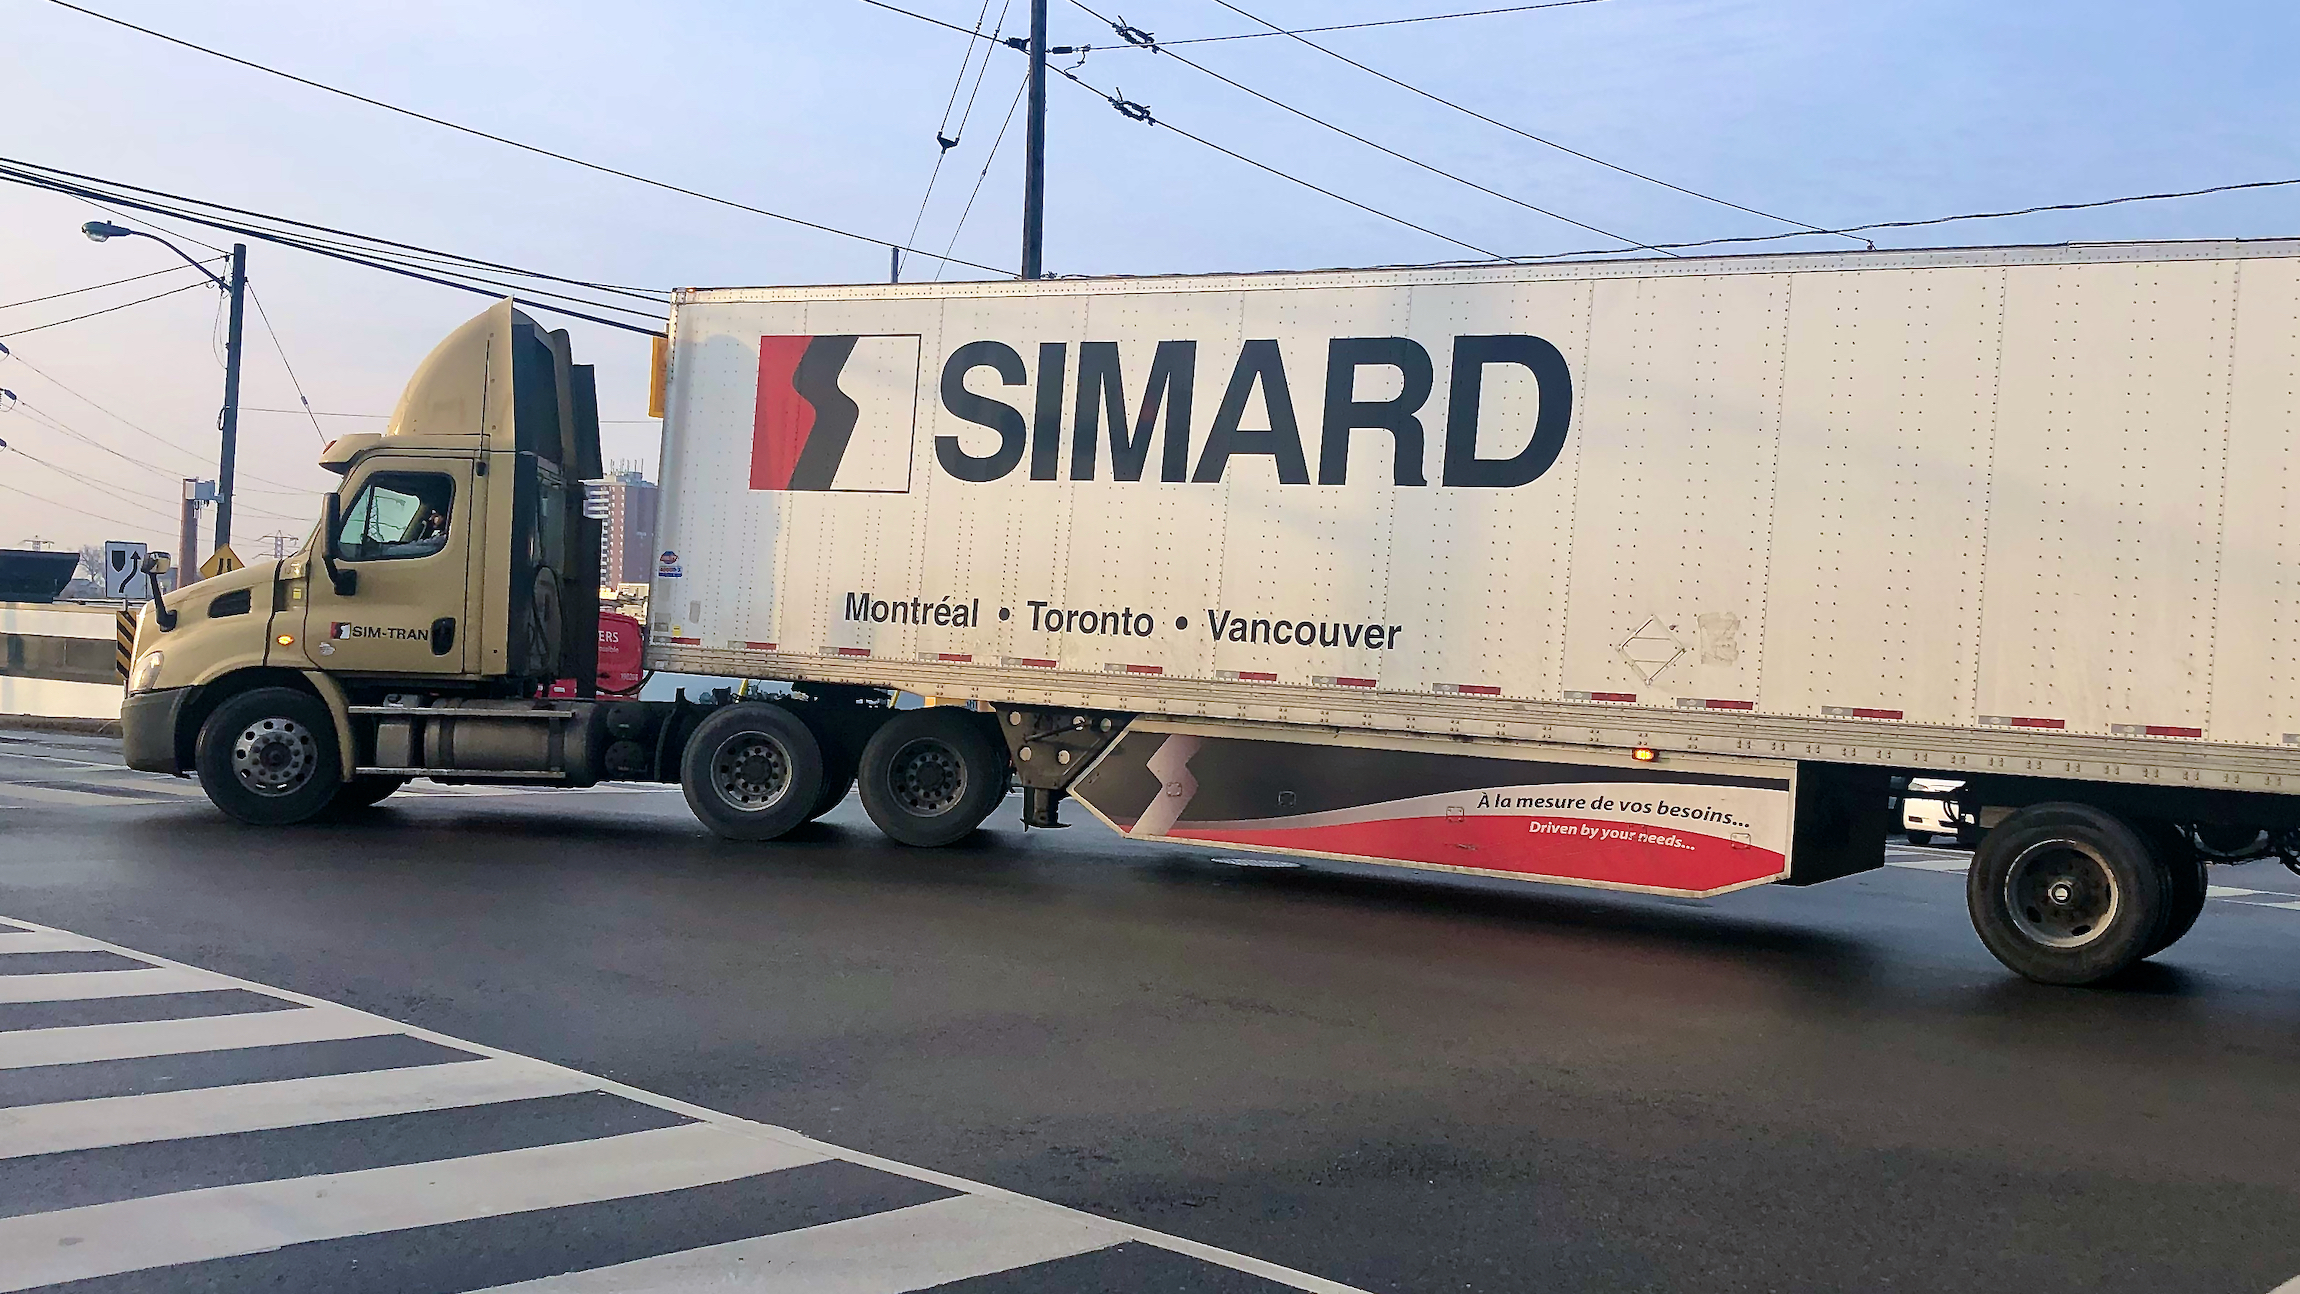 A tractor-trailer logo SIMARD makes a turn on a street to illustrate an article about the Canadian election.